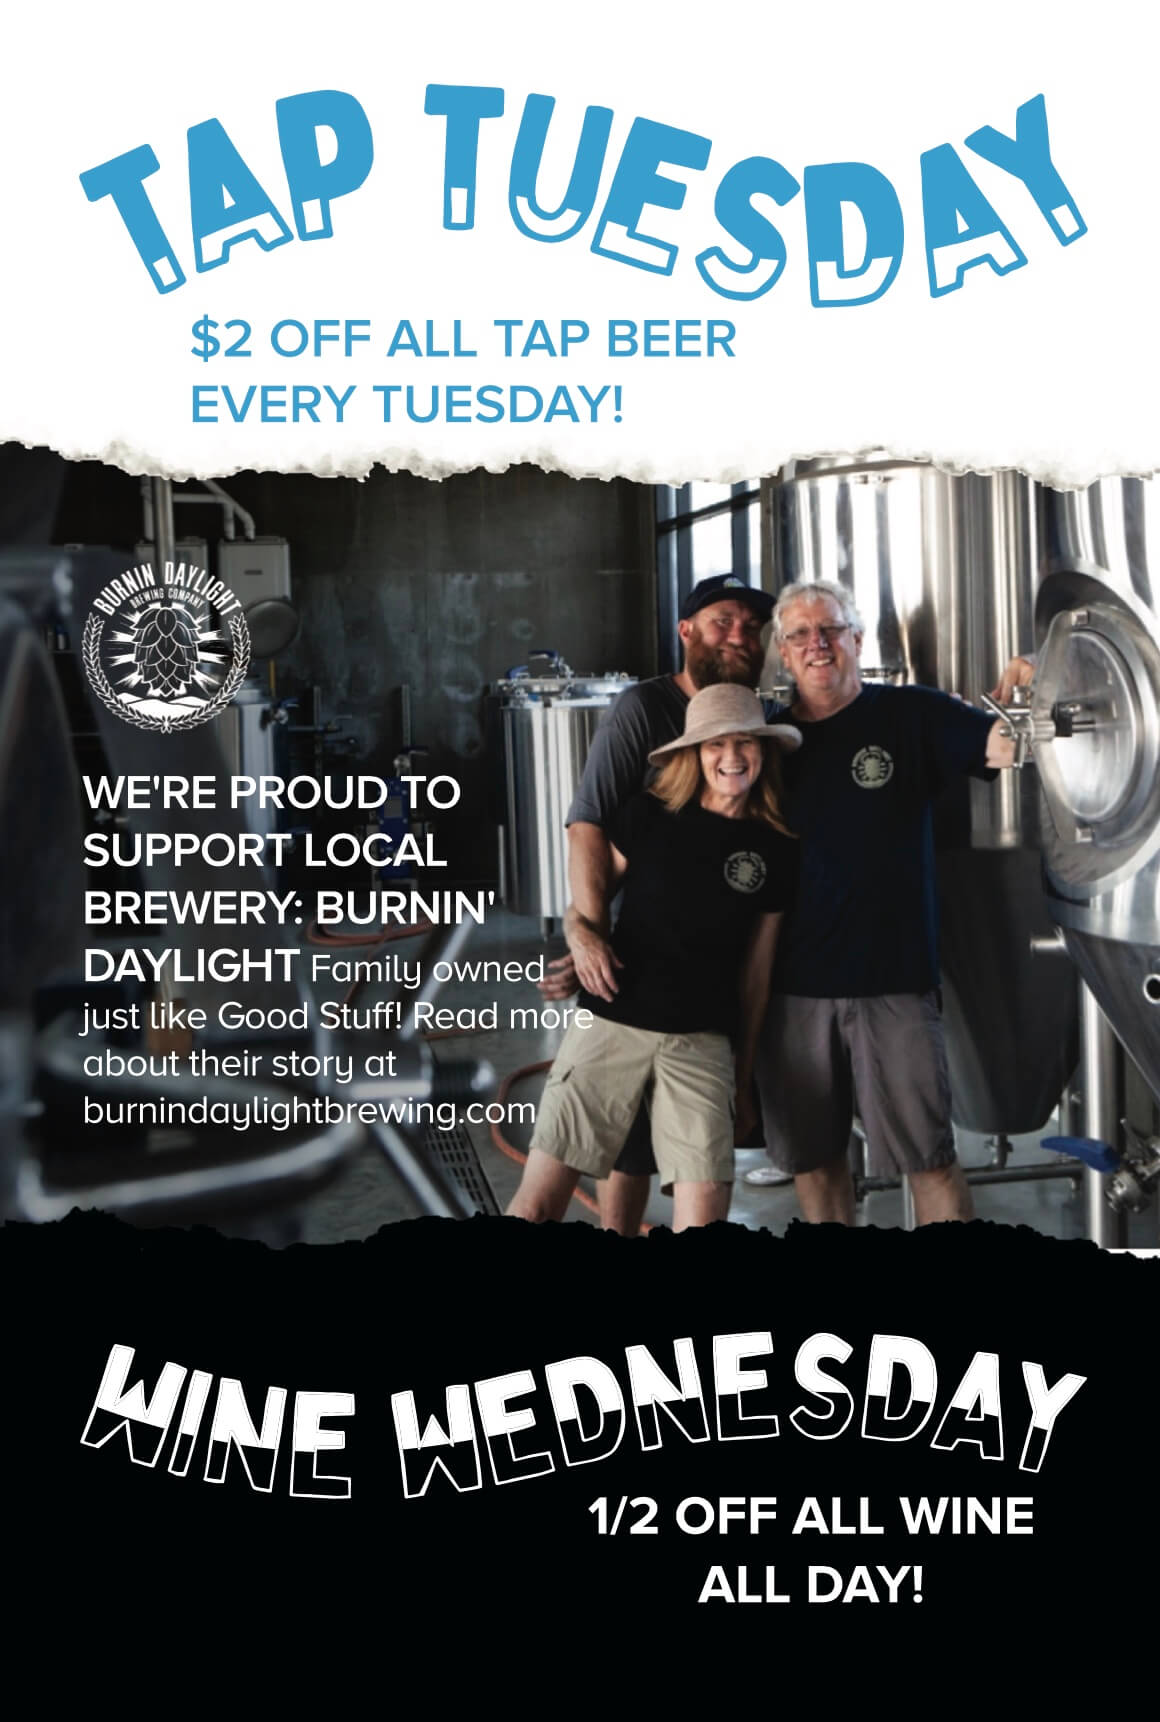 Tap Tuesday $2 off all tap beer every Tuesday. We're proud to support local brewery: burnin' daylight. Family owned, just like good stuff! read more about their story at burningdaylightbrewing.com. Wine Wednesday 1/2 off all wine all day.